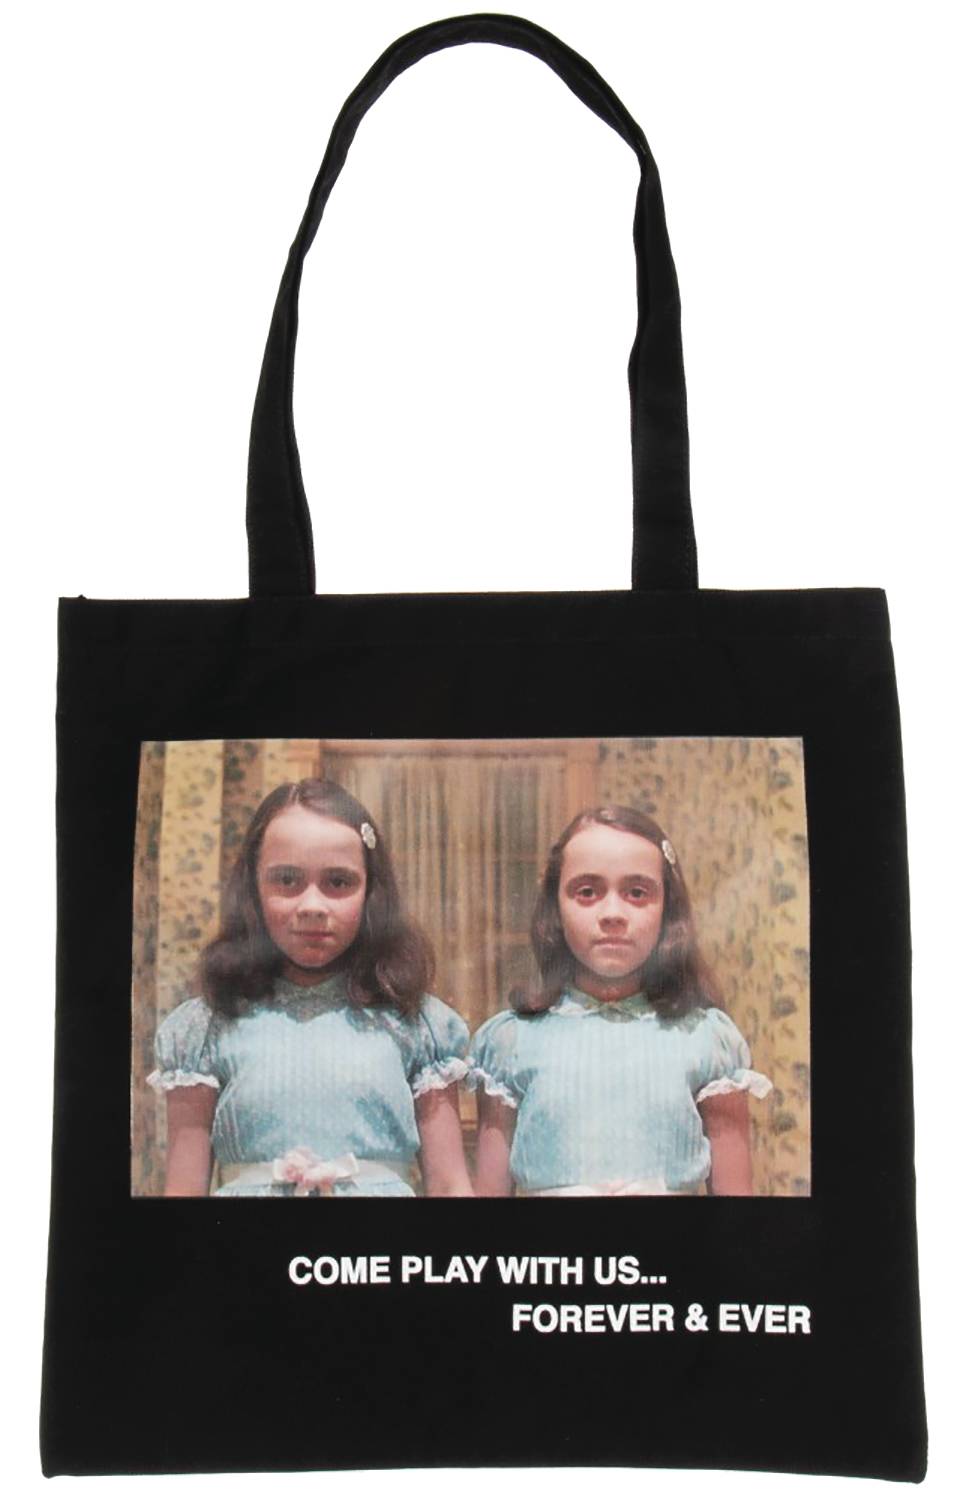 THE SHINING TWINS IMAGE CAPTURE CANVAS TOTE